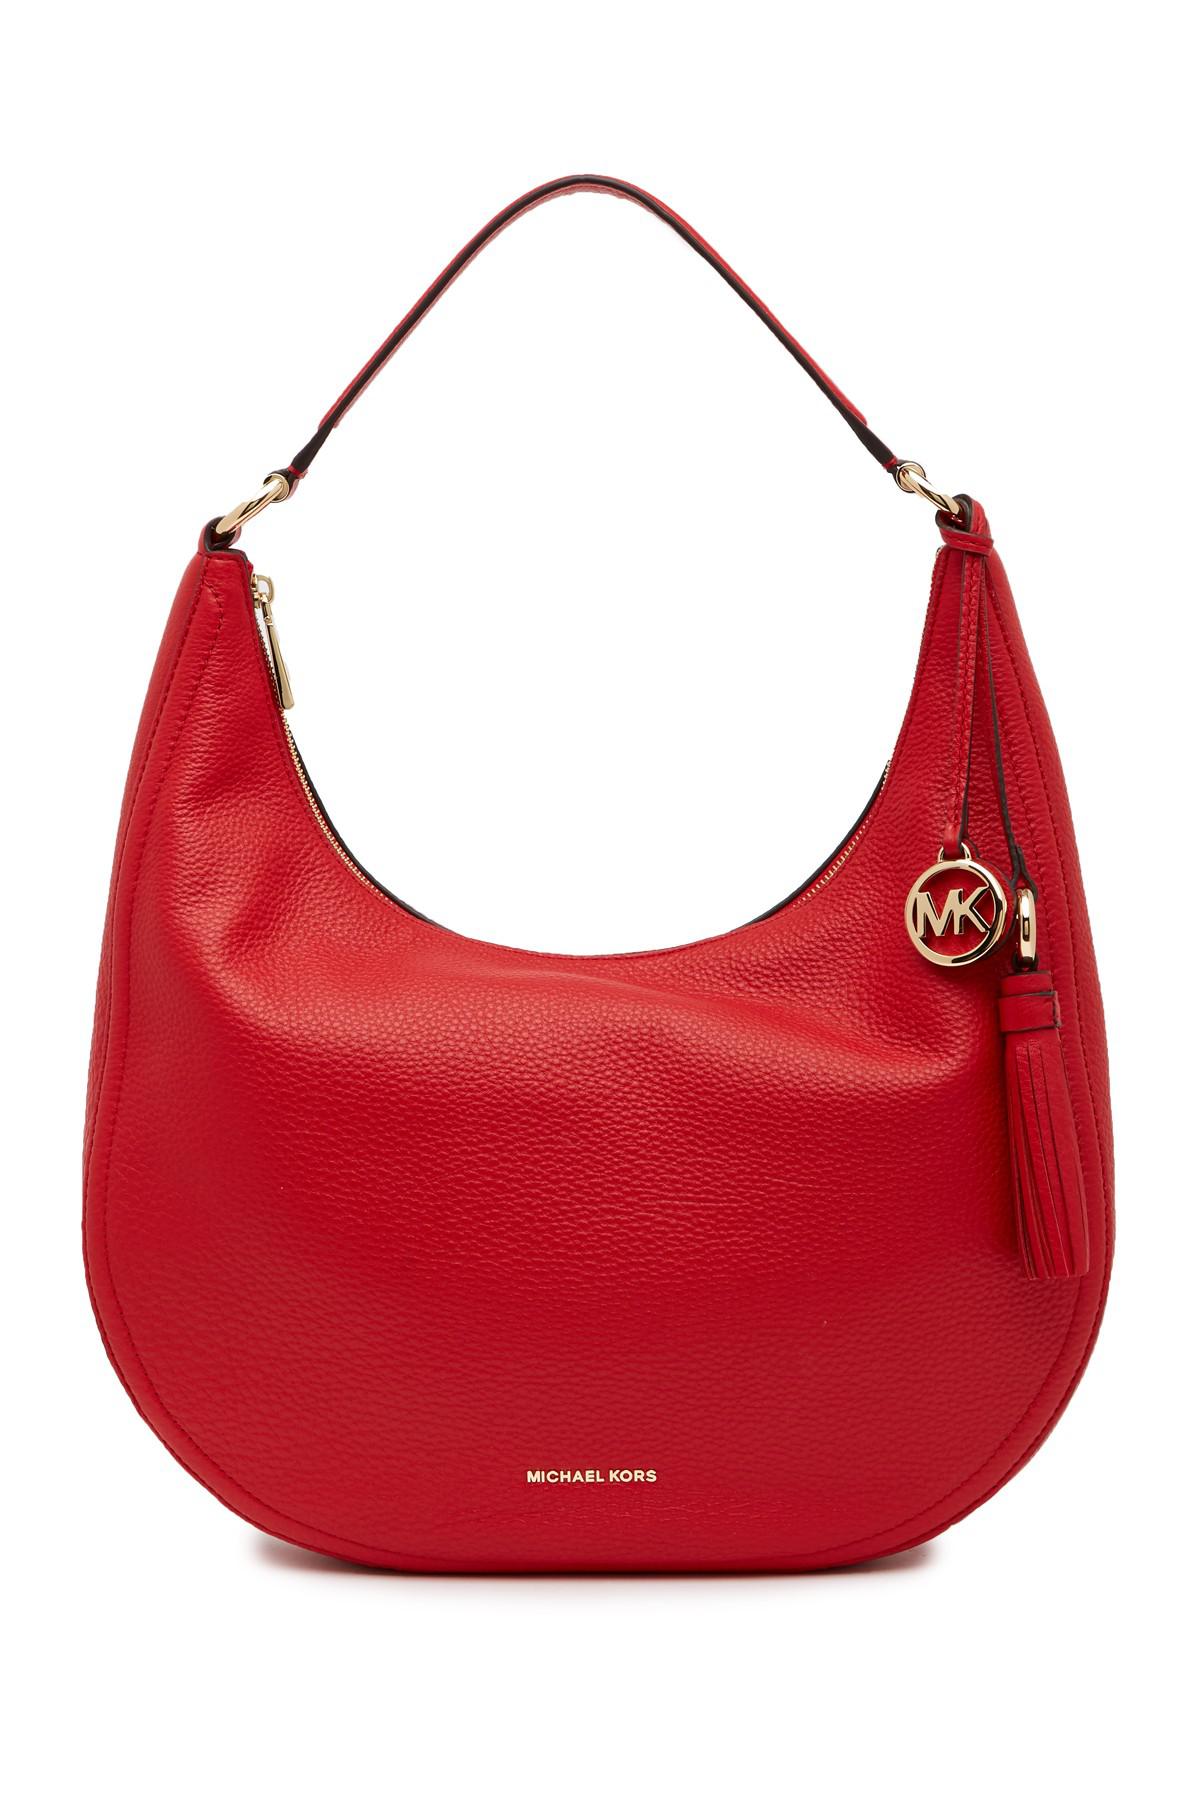 Michael Kors Large Leather Hobo Bag in Red